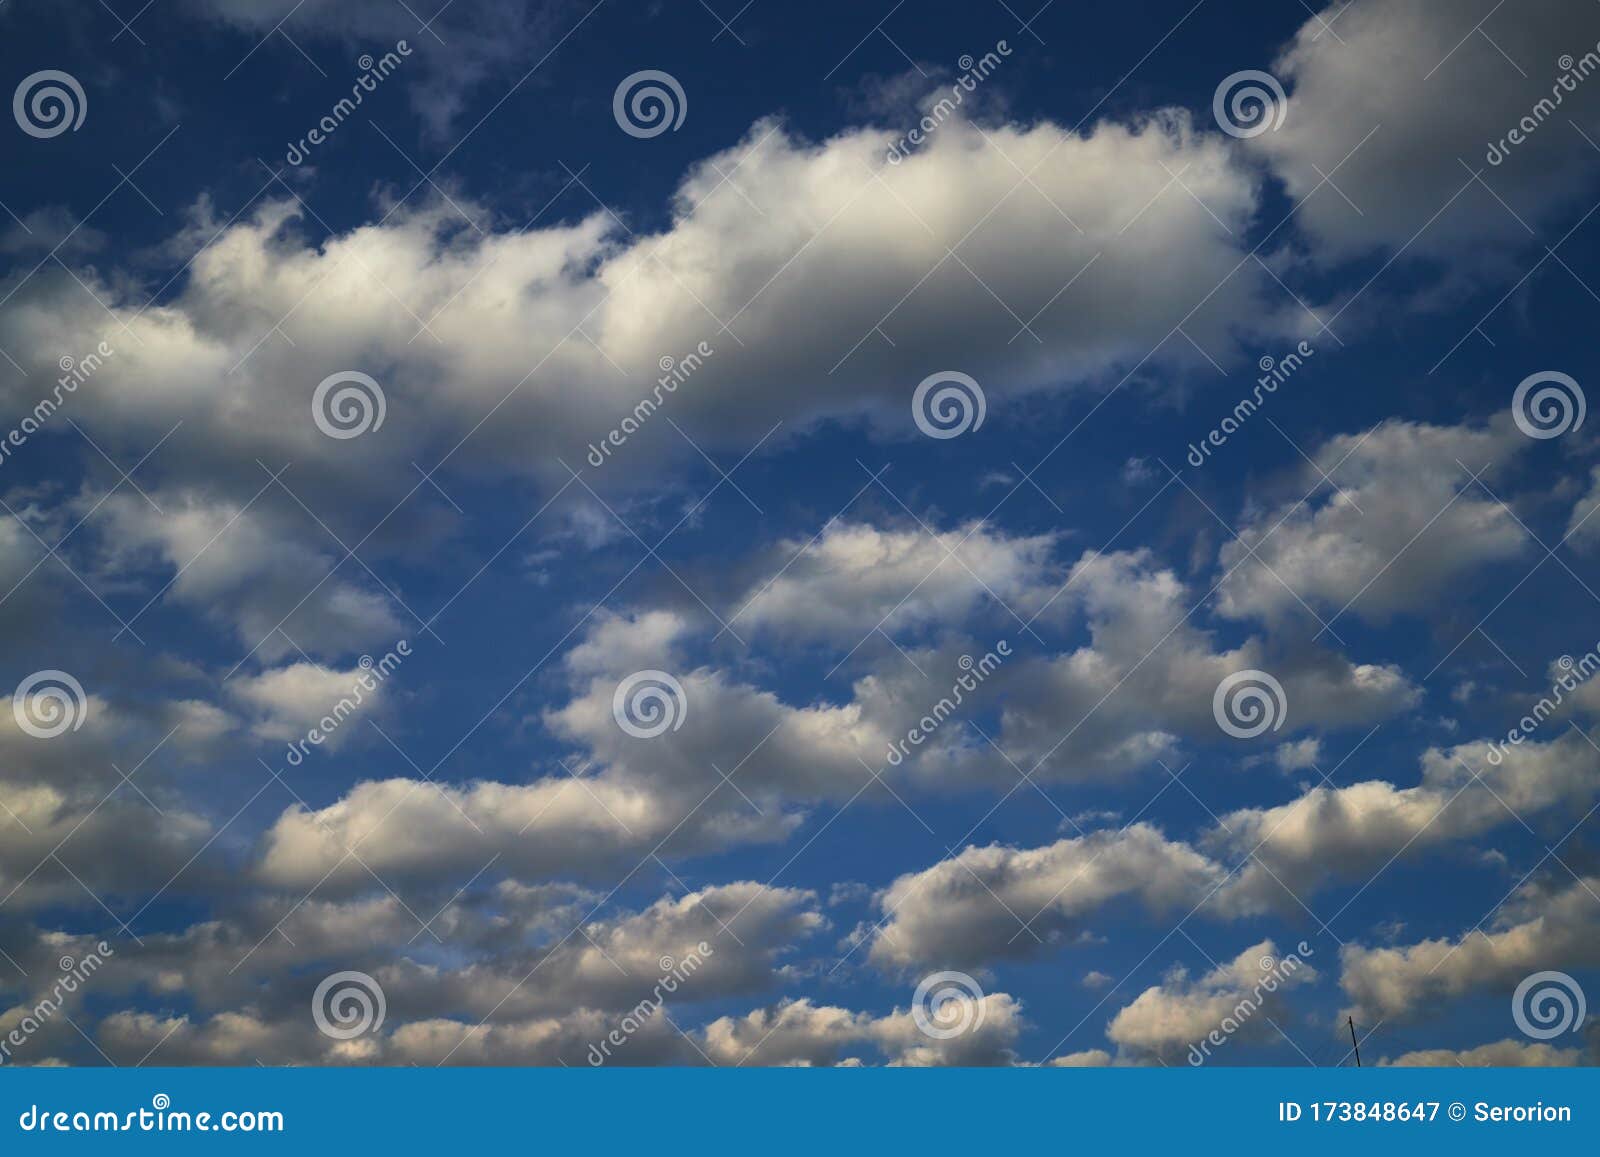 beautiful, spring clouds in the blue sky